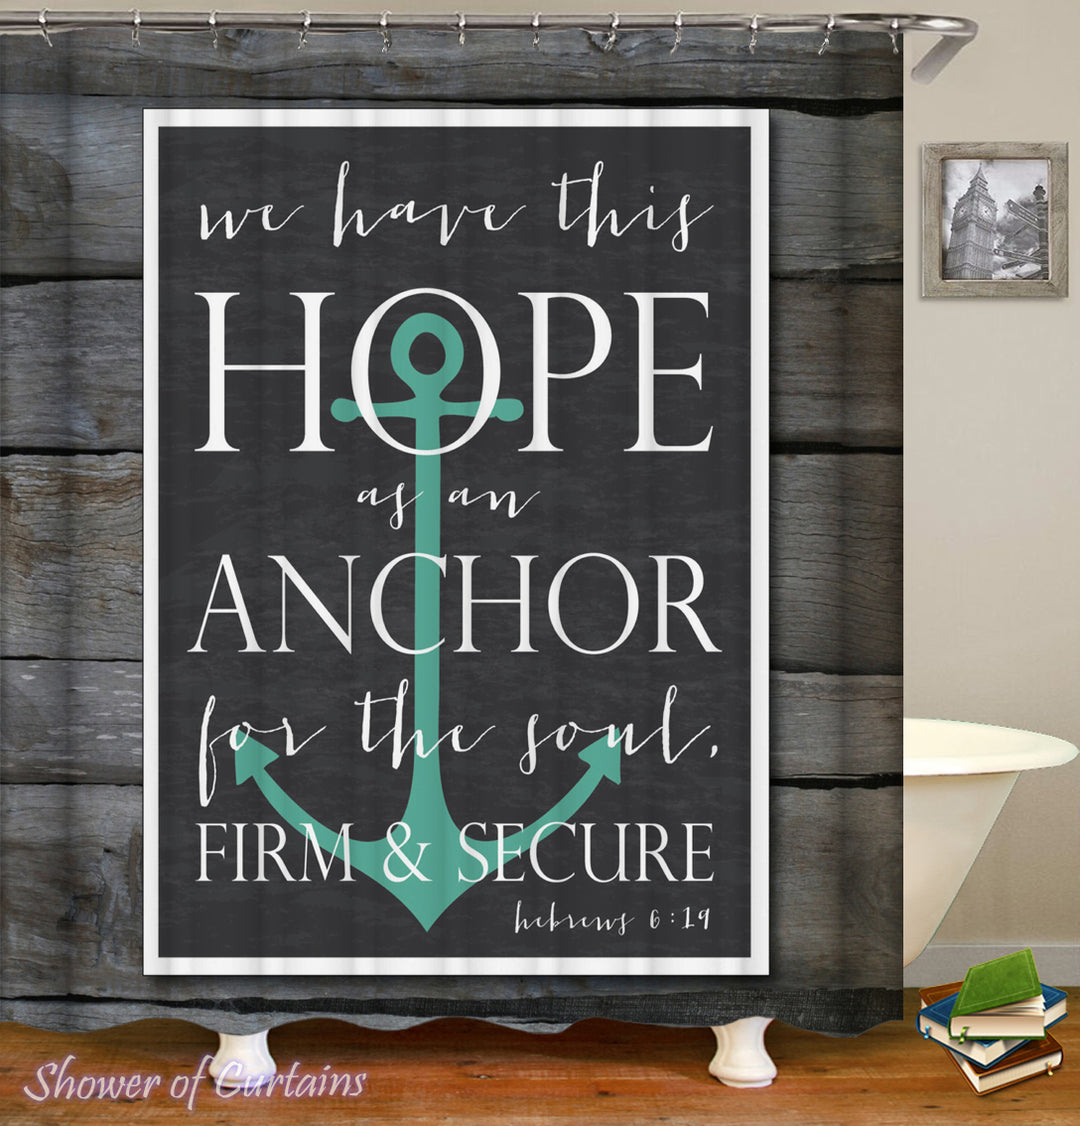 Nautical Shower Curtain Design of Bible’s Anchor Quote